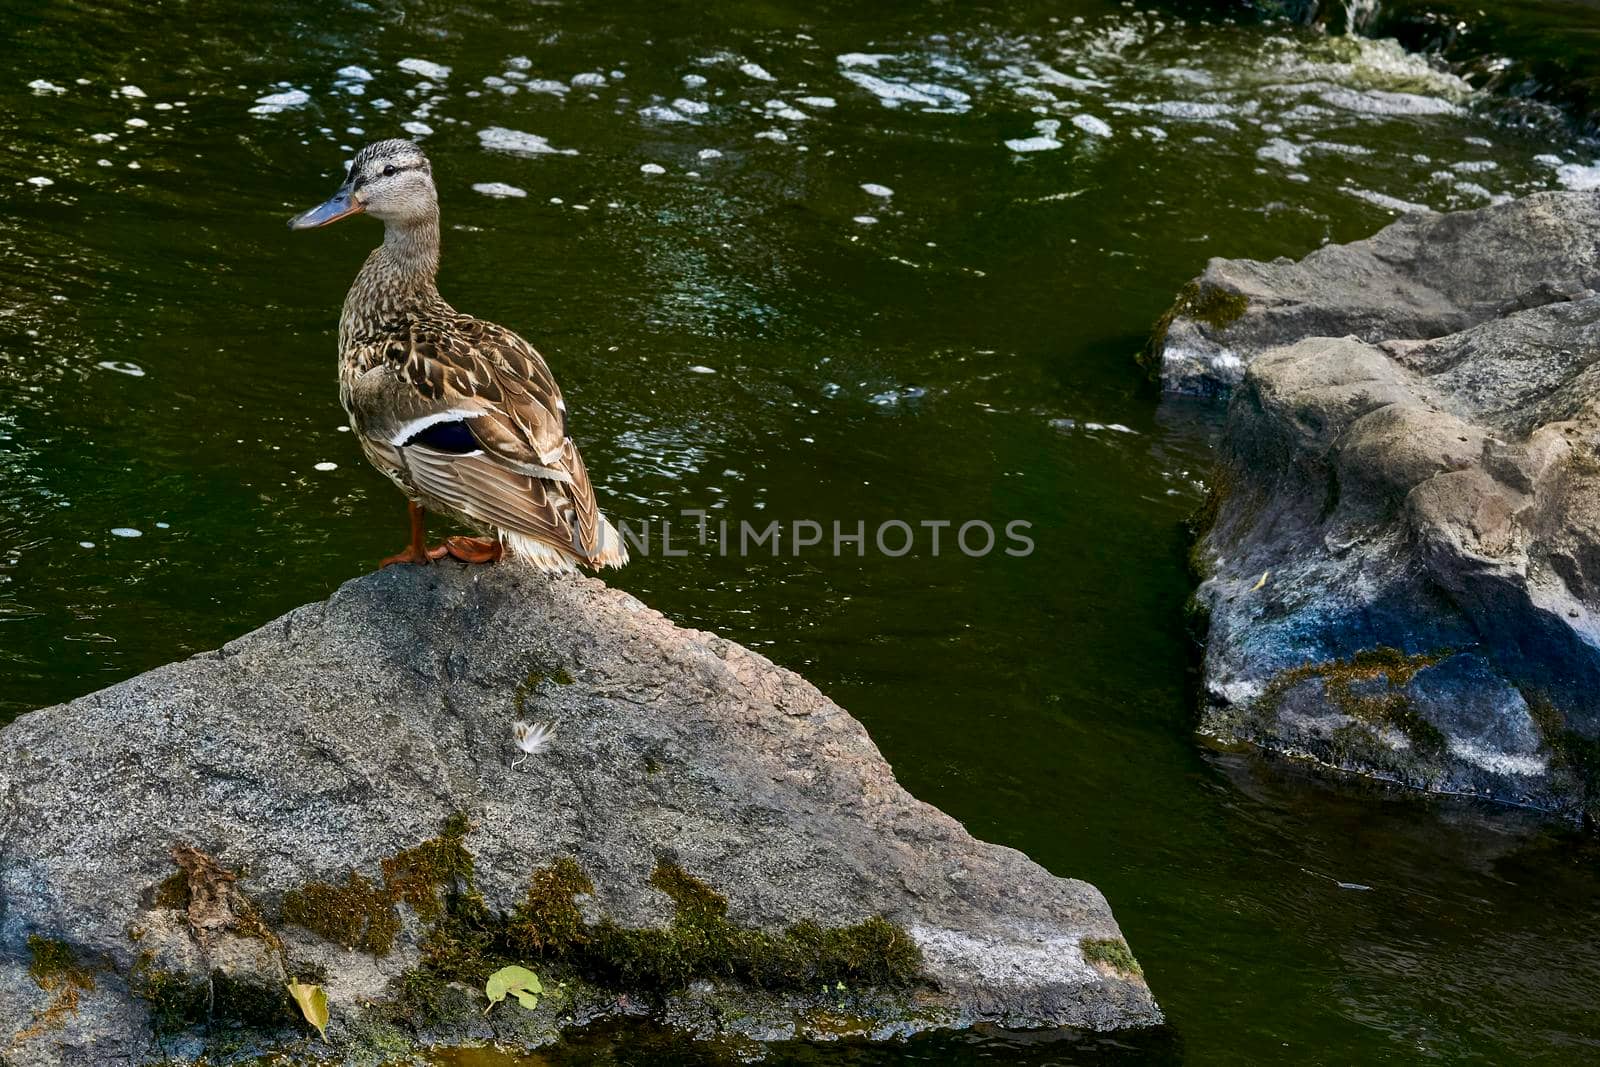 a waterbird with a broad blunt bill, short legs, webbed feet, and a waddling gait. Wild brown duck sit on volcanic rocks among water.